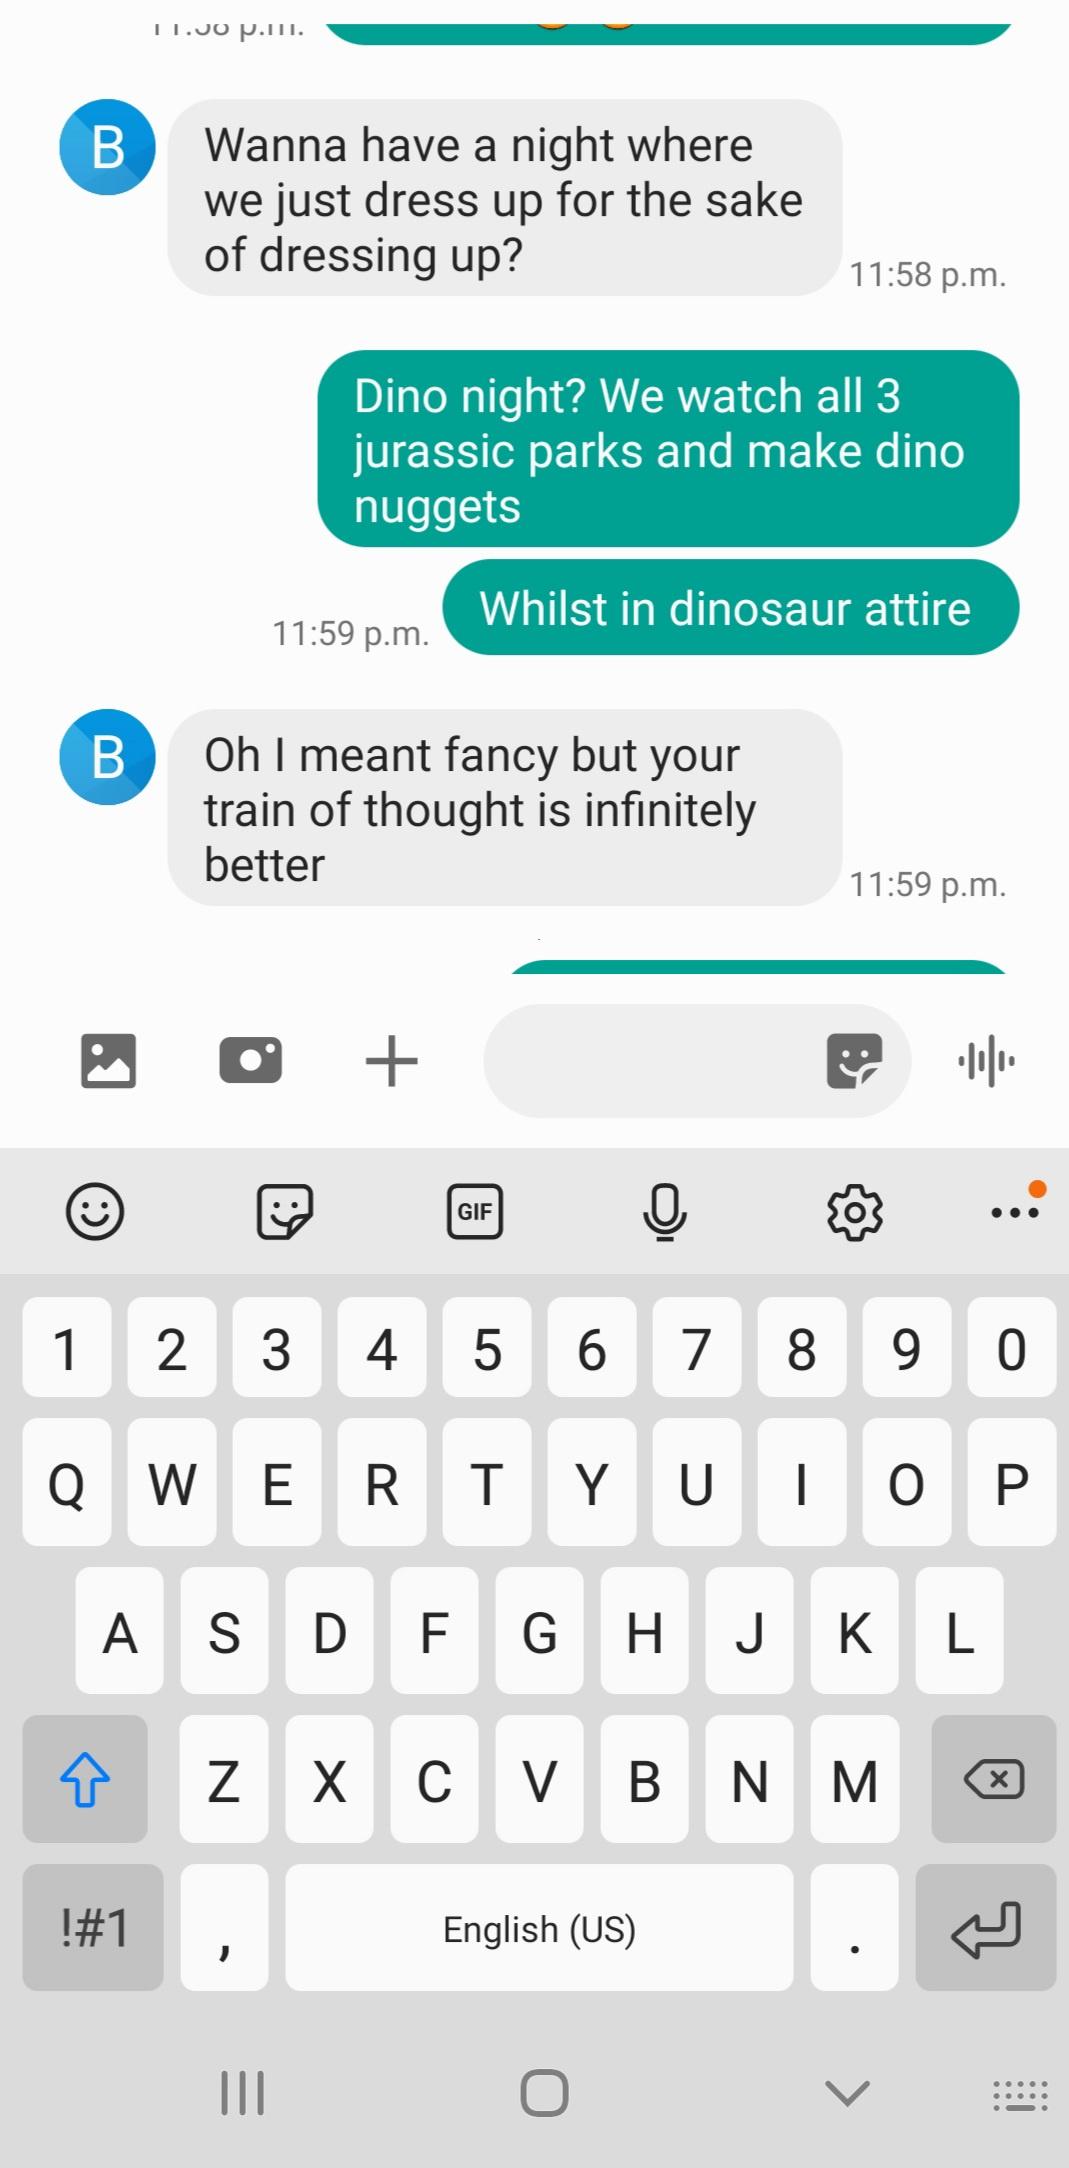 screenshot - 11.Jo pun. B Wanna have a night where we just dress up for the sake of dressing up? p.m. Dino night? We watch all 3 jurassic parks and make dino nuggets Whilst in dinosaur attire p.m. B Oh I meant fancy but your train of thought is infinitely